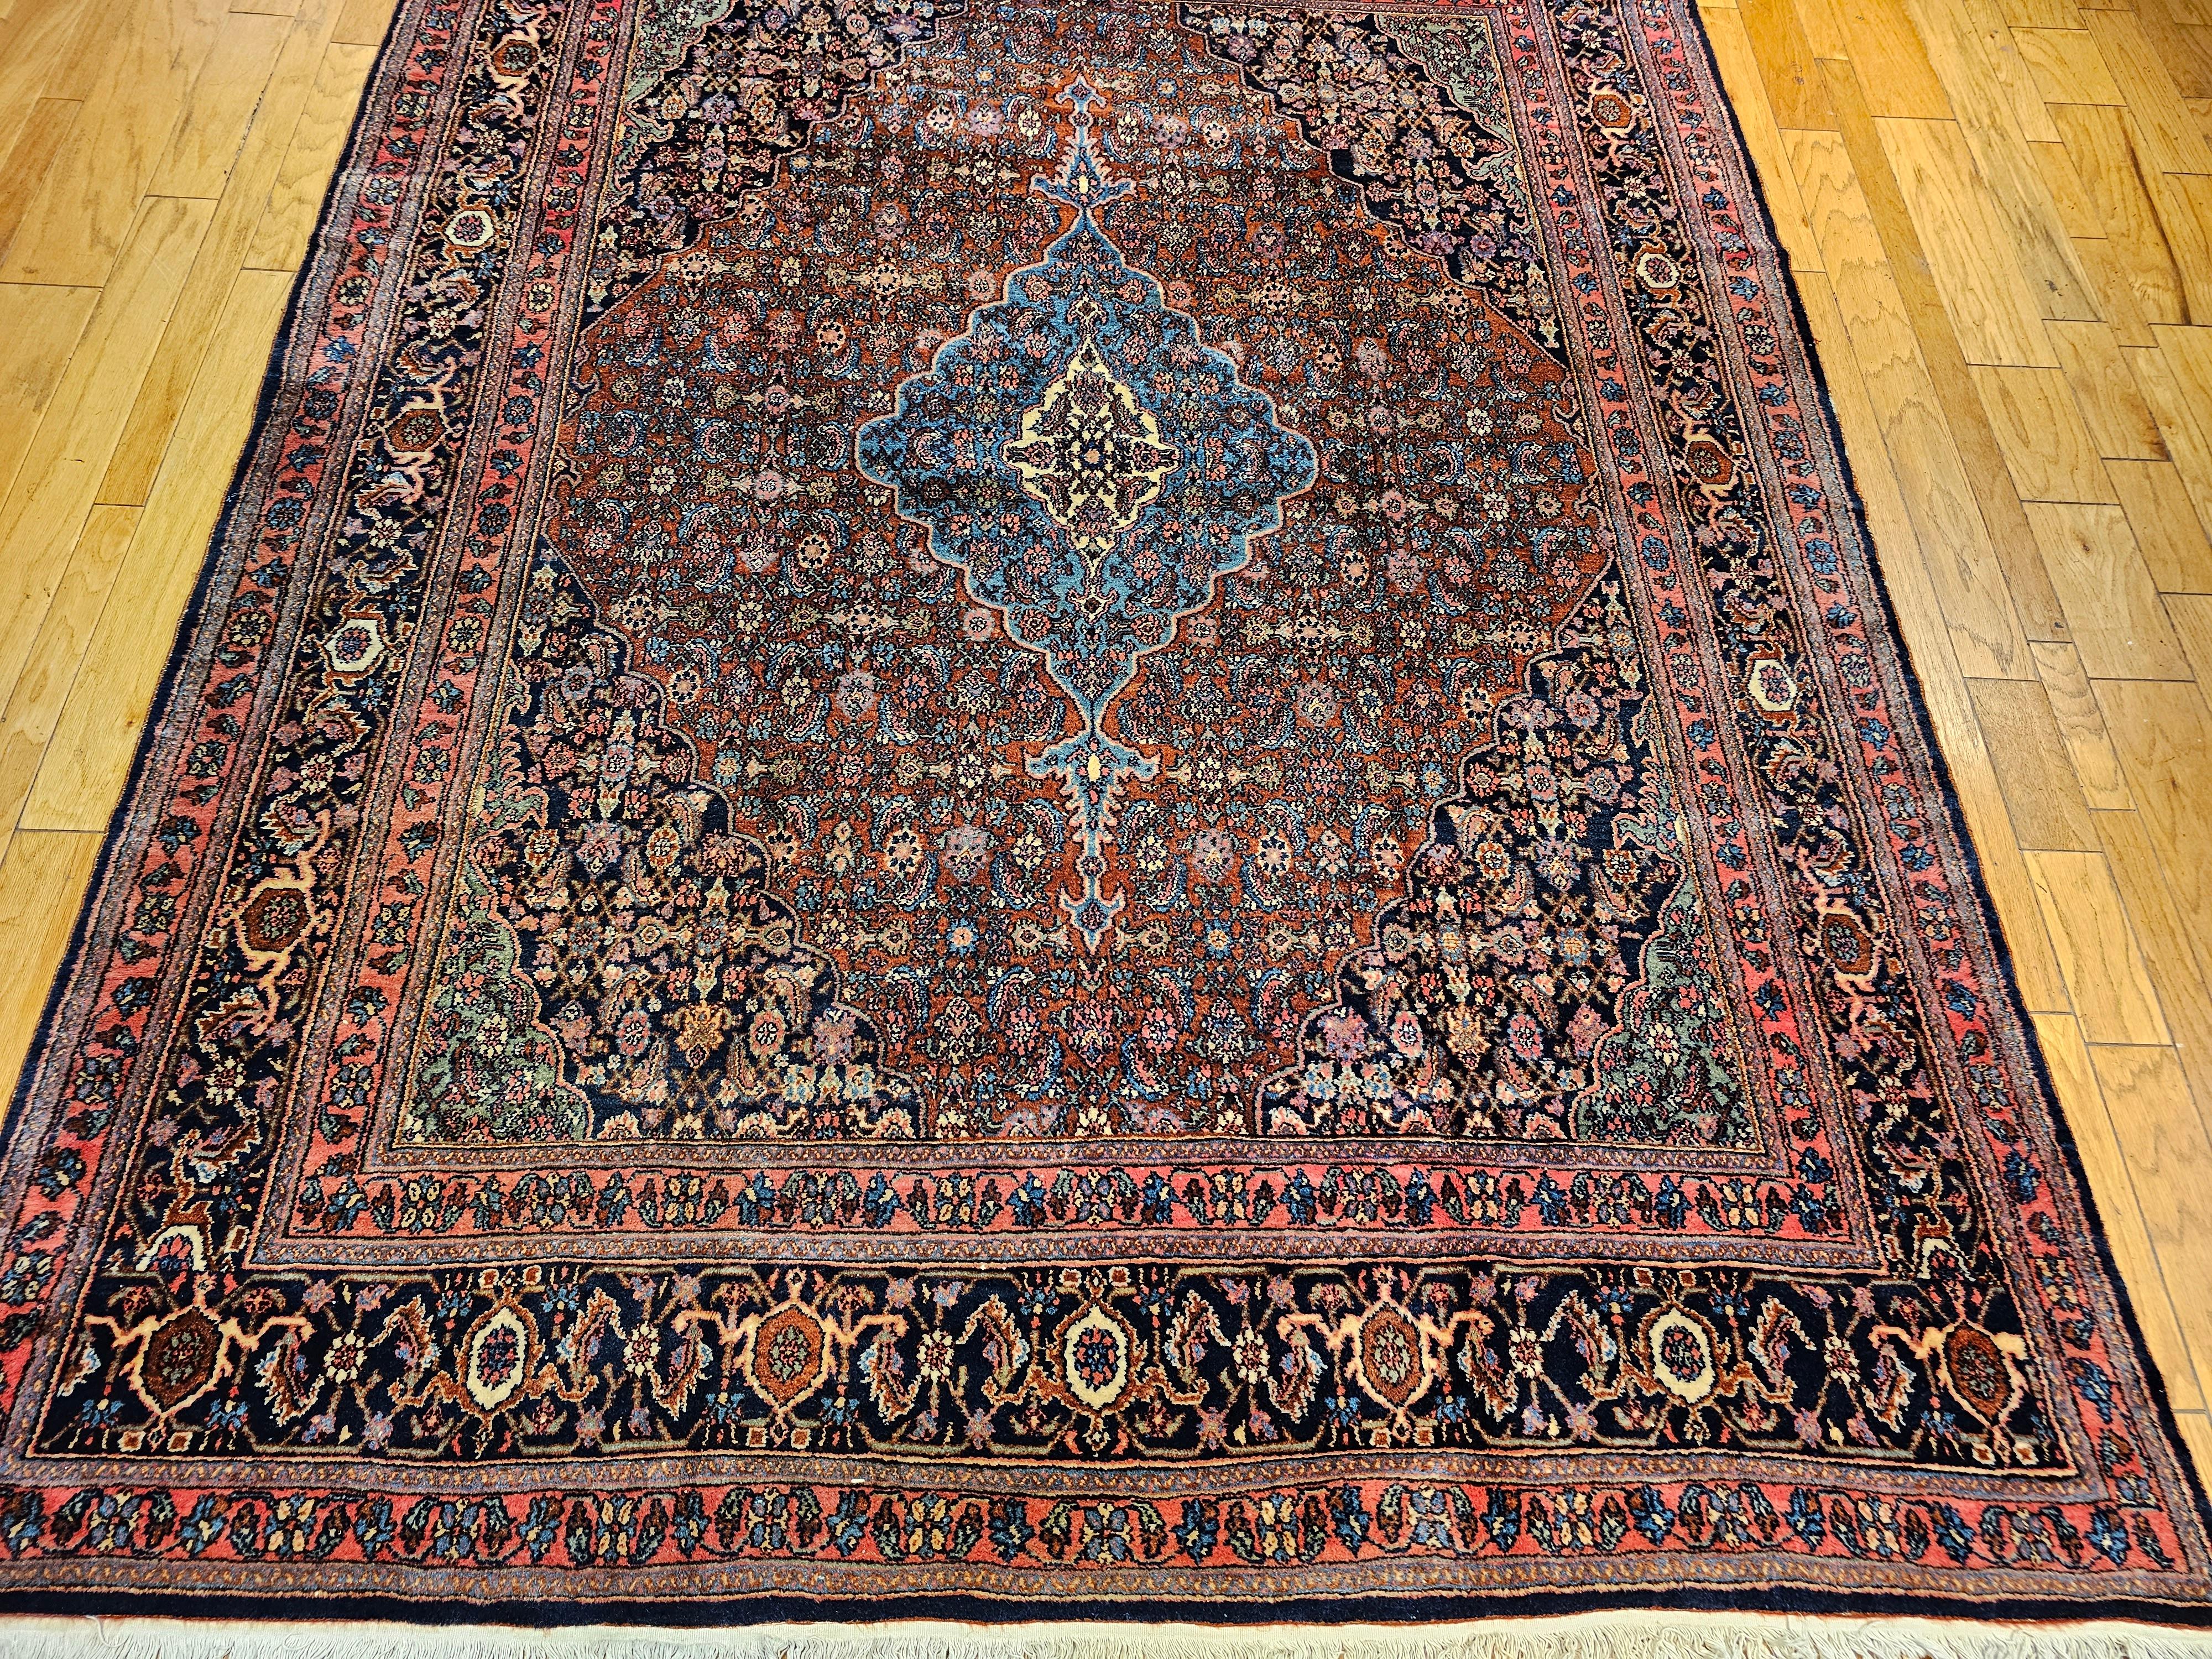  A vintage Persian Bibikabad in Herati pattern  in a rust red, French blue, and green colors from the early 1900s.  The Bibikabad rugs are recognized for their unique and beautiful elongated medallions which is part of their signature design.  The